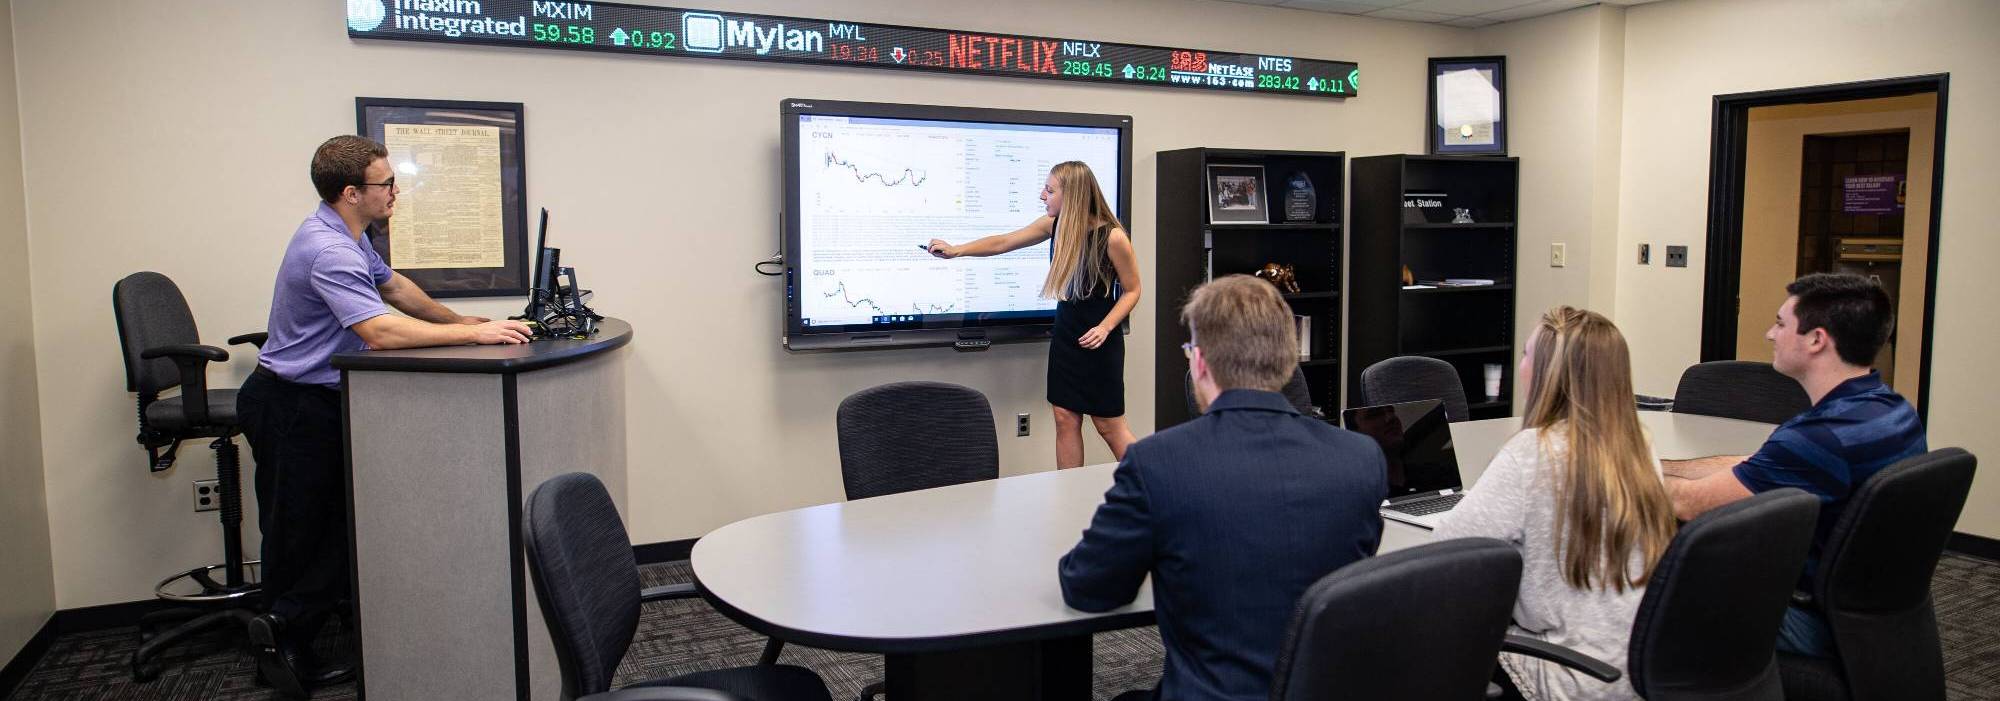 students giving a presentation with a large interactive screen and a podium